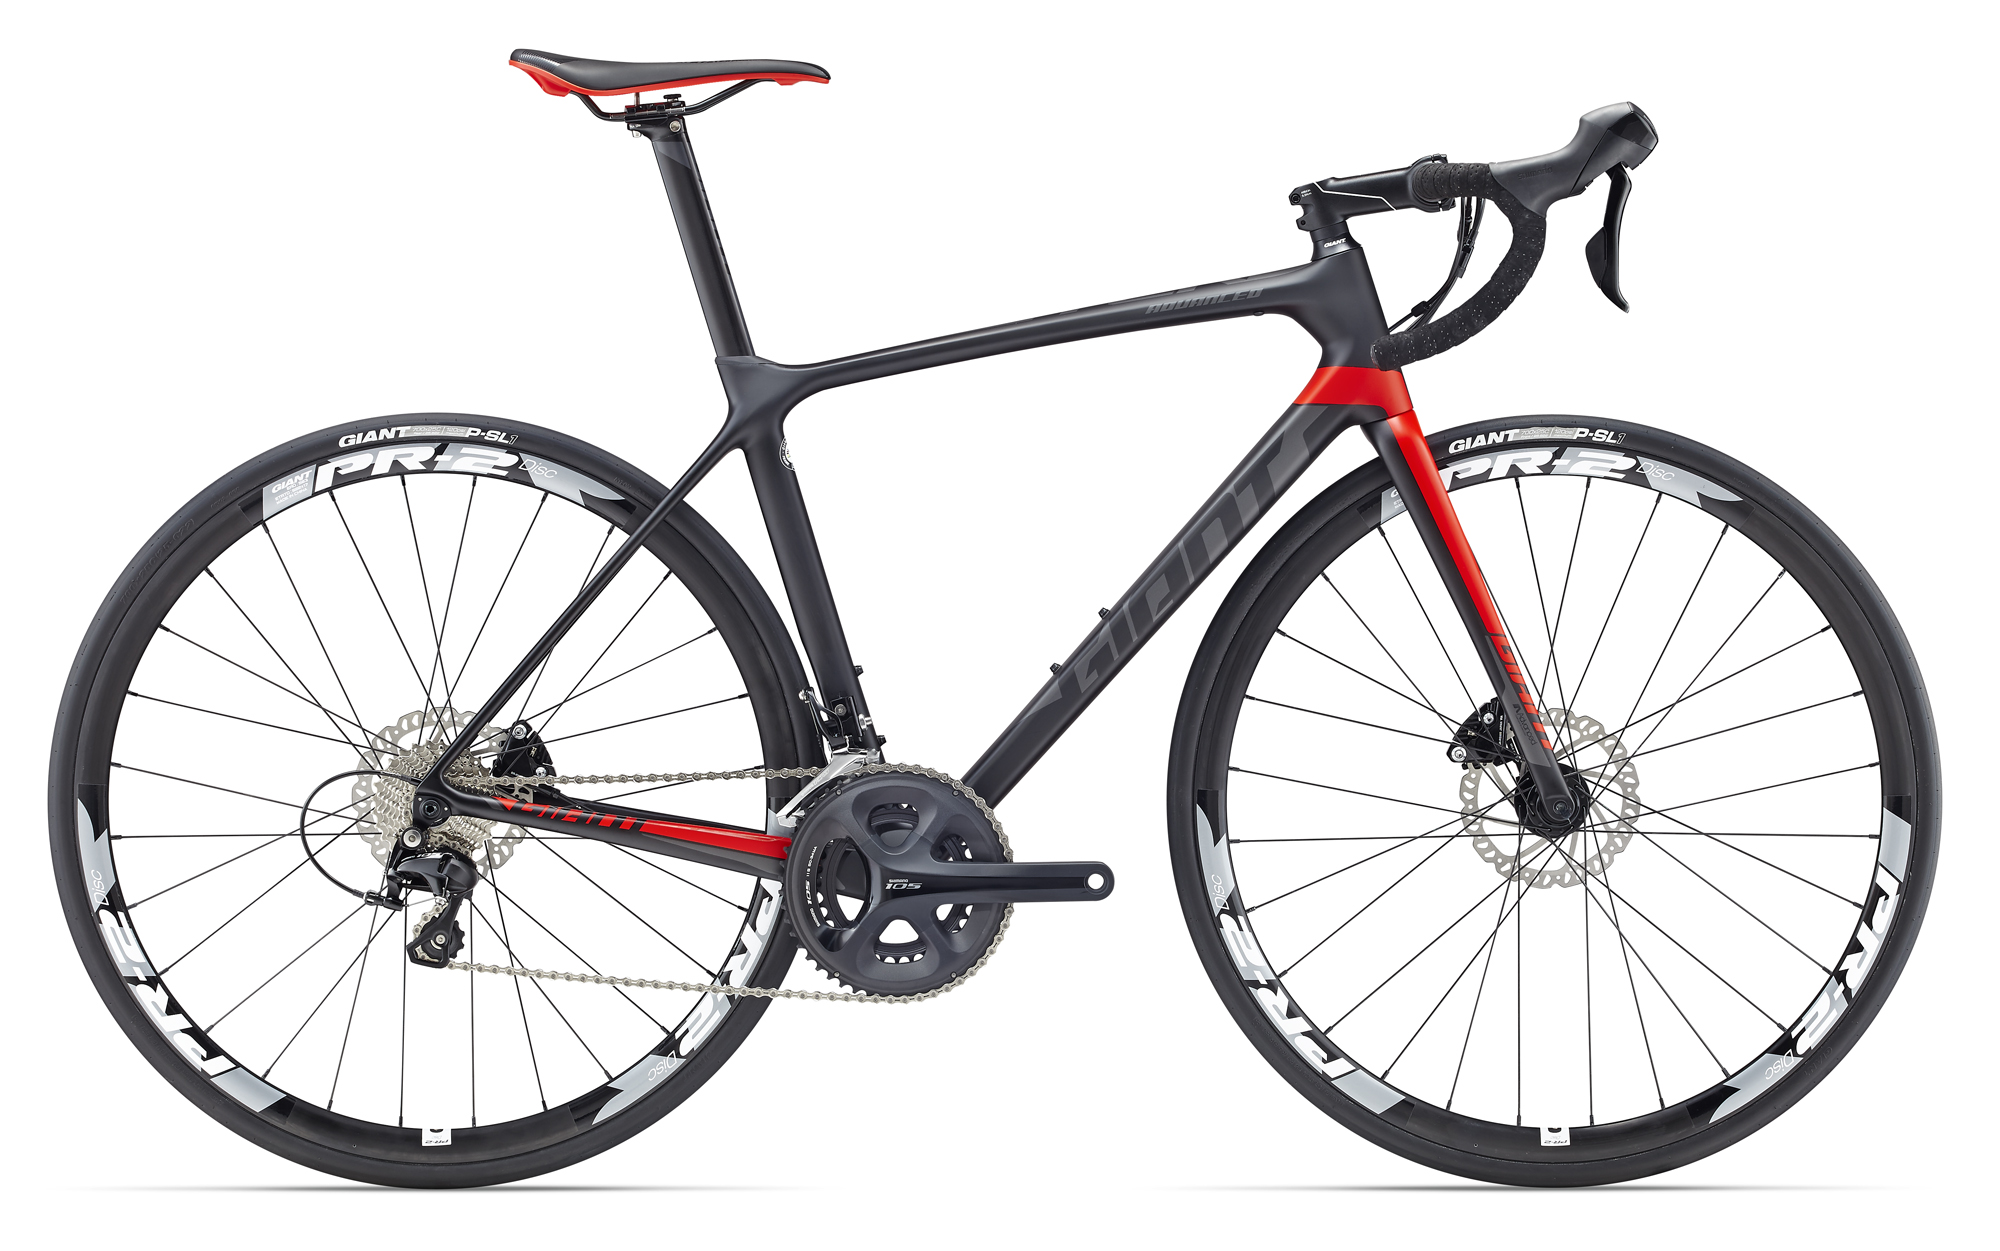 The TCR Advanced 2 Disc.